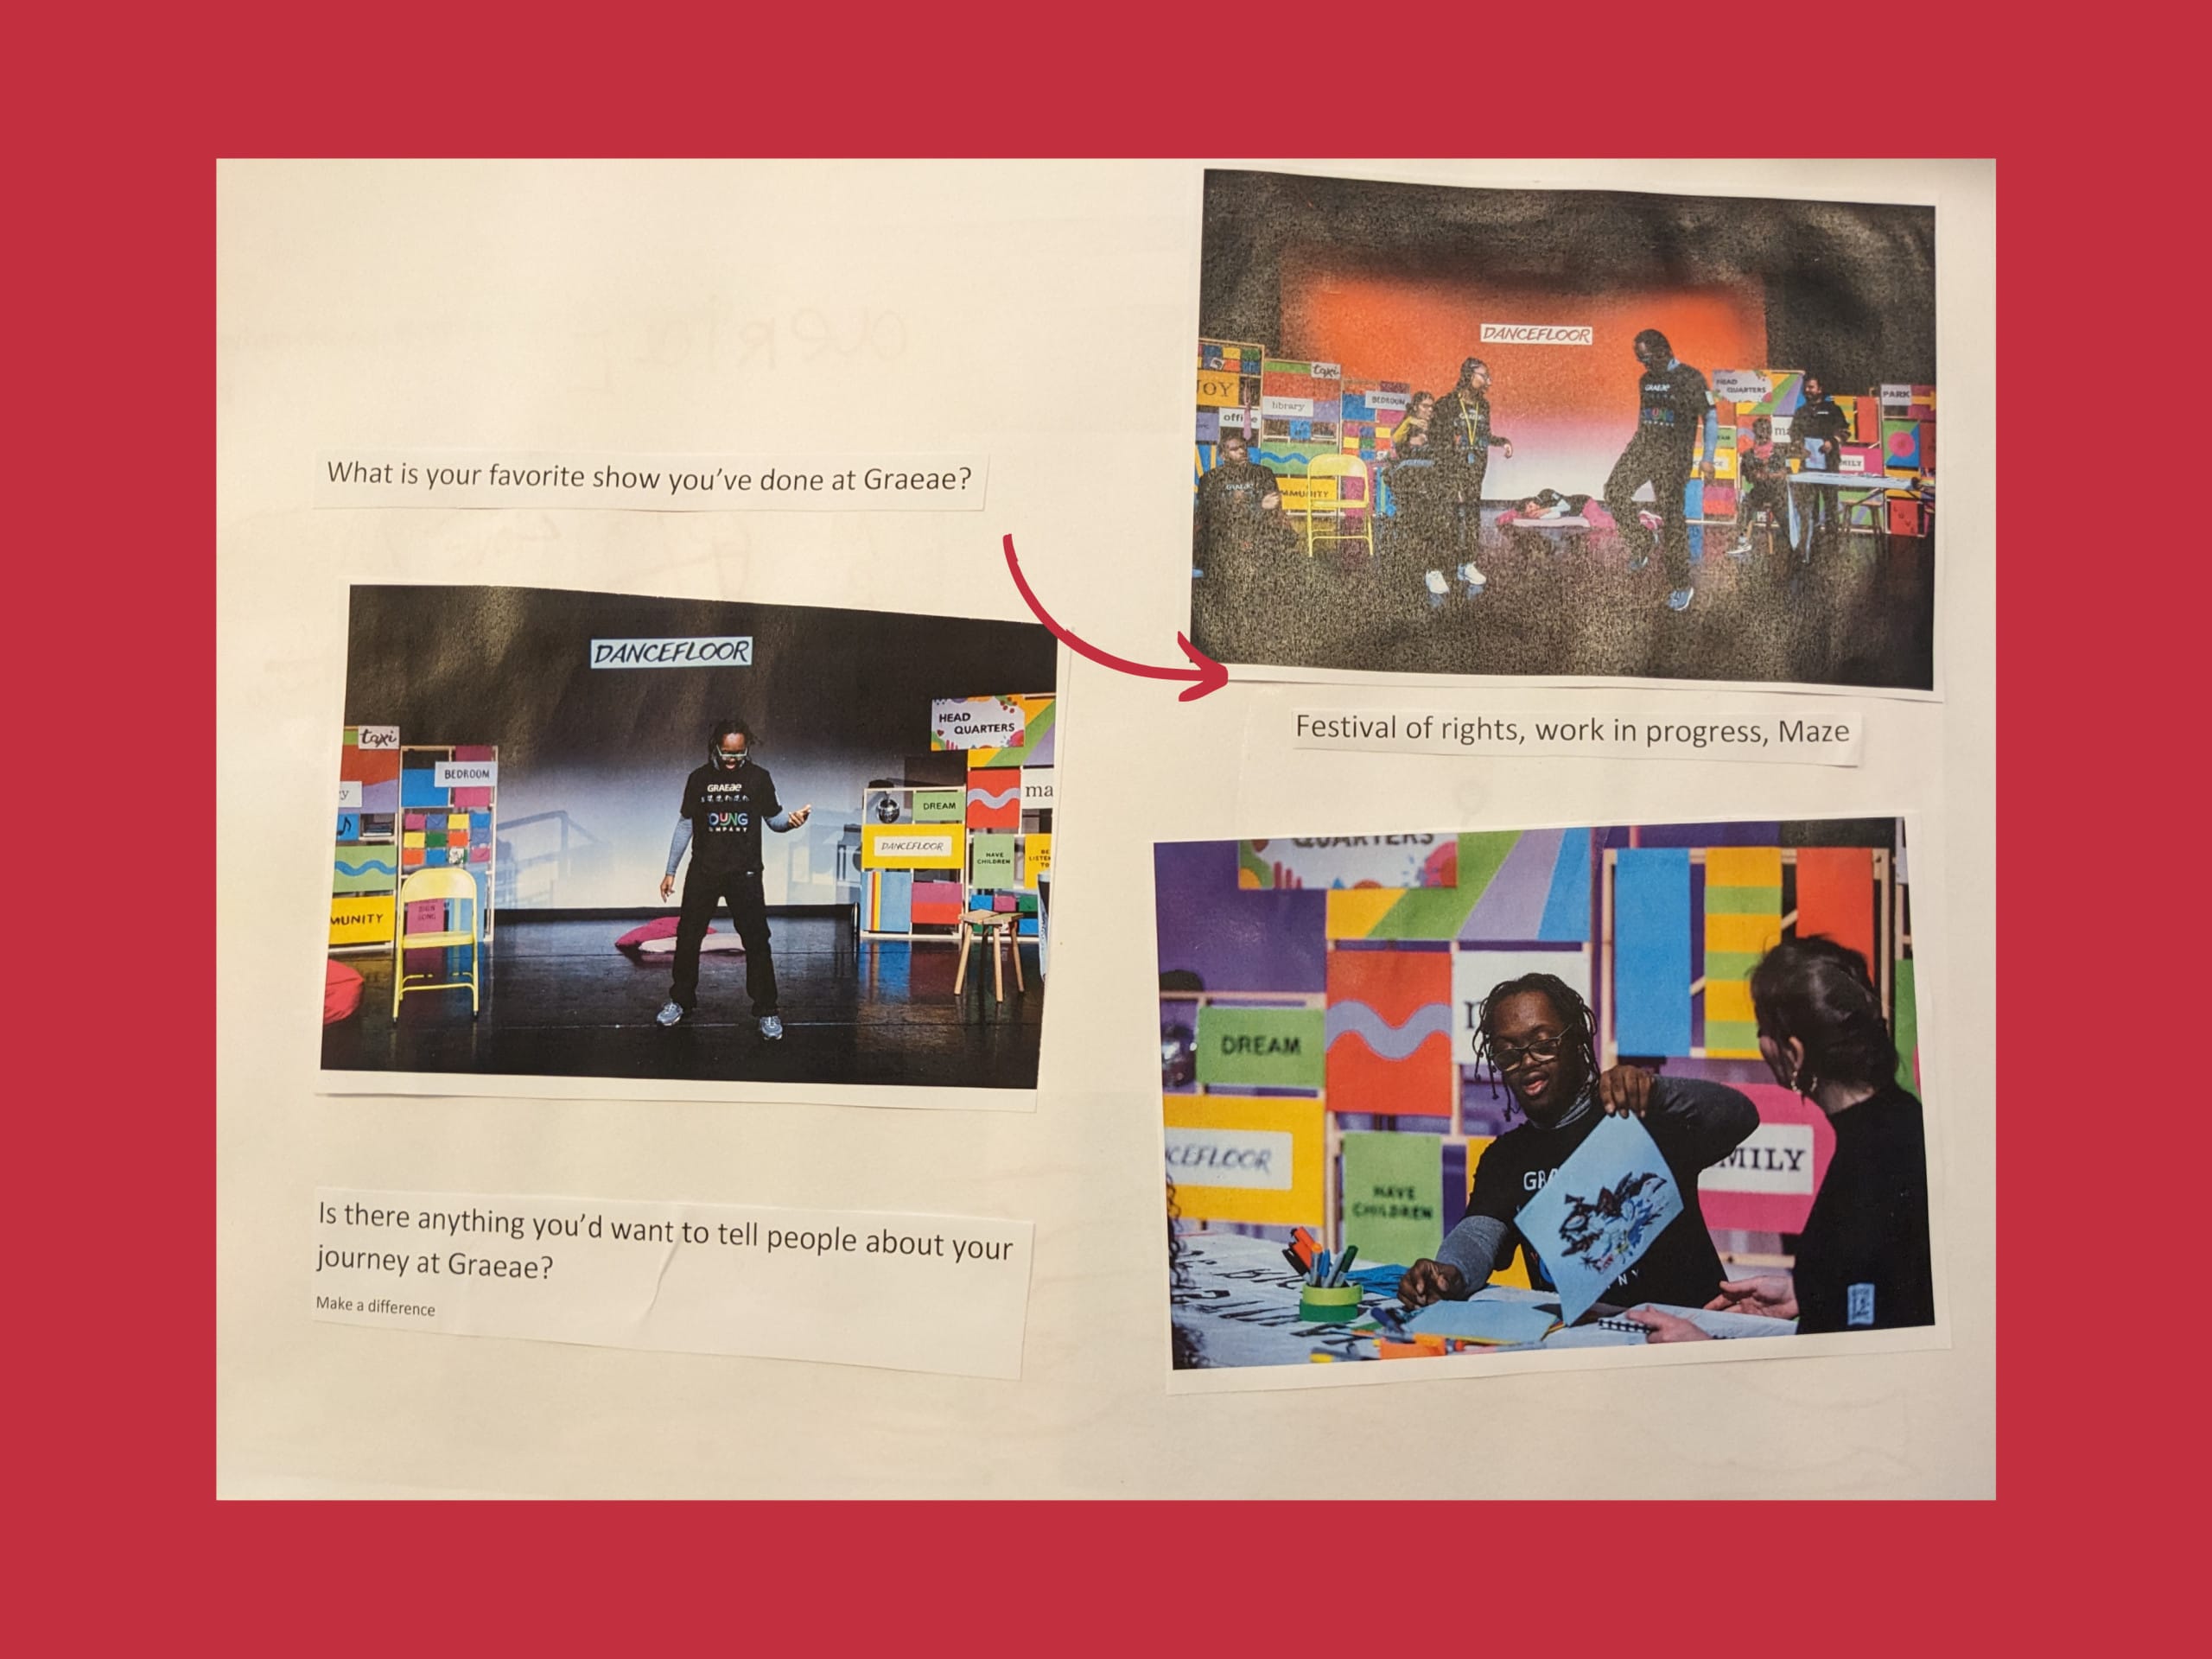 Three images of Marcus in Festival of rights. In the picture on the top left, he is dancing with another performer. In the image on the left, he is dancing by himself. In the image on the bottom right, Marcus is showing off some art to Mette. There is a red background behind the image.